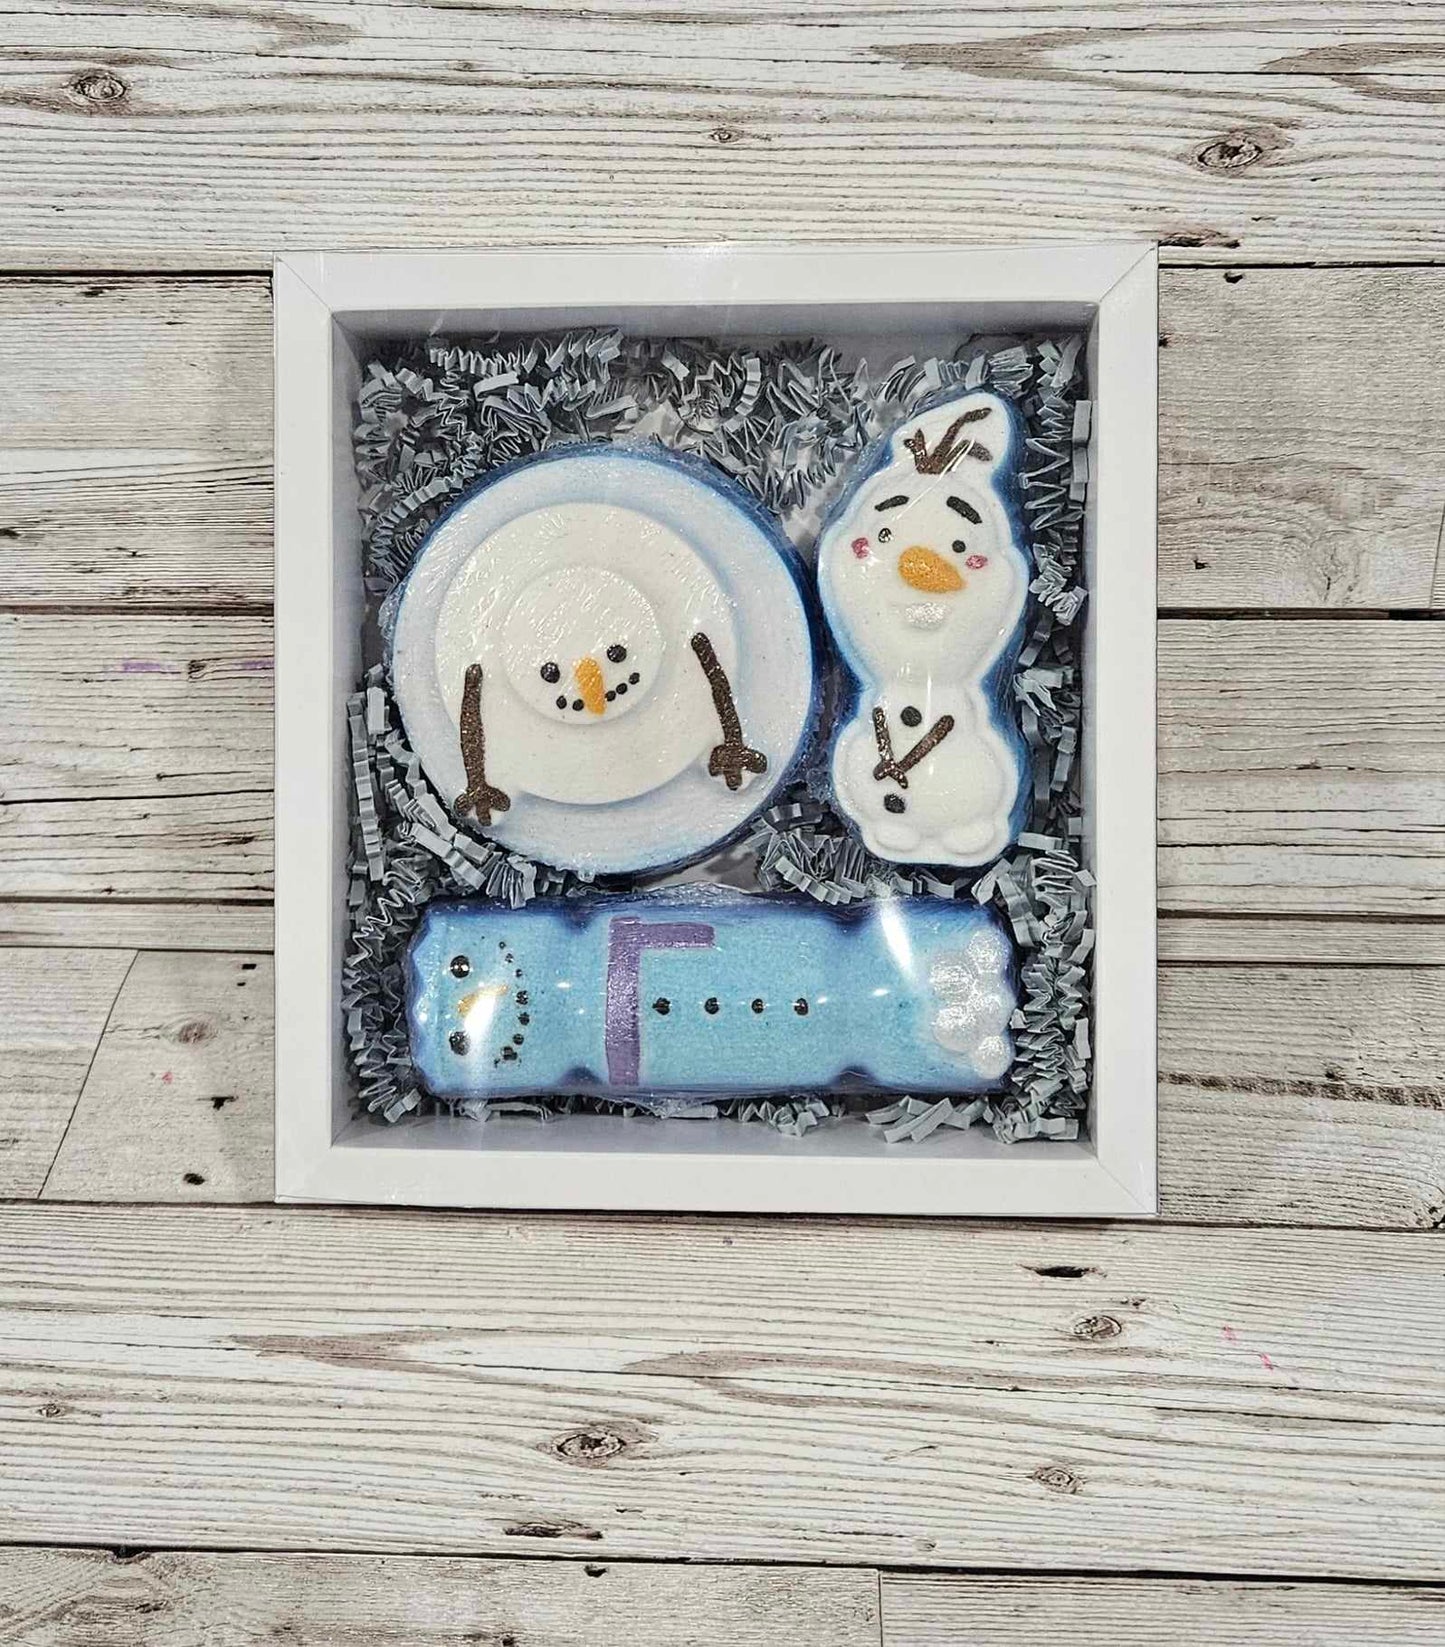 'Do you want to build a Snowman' Bath Bomb Gift Set